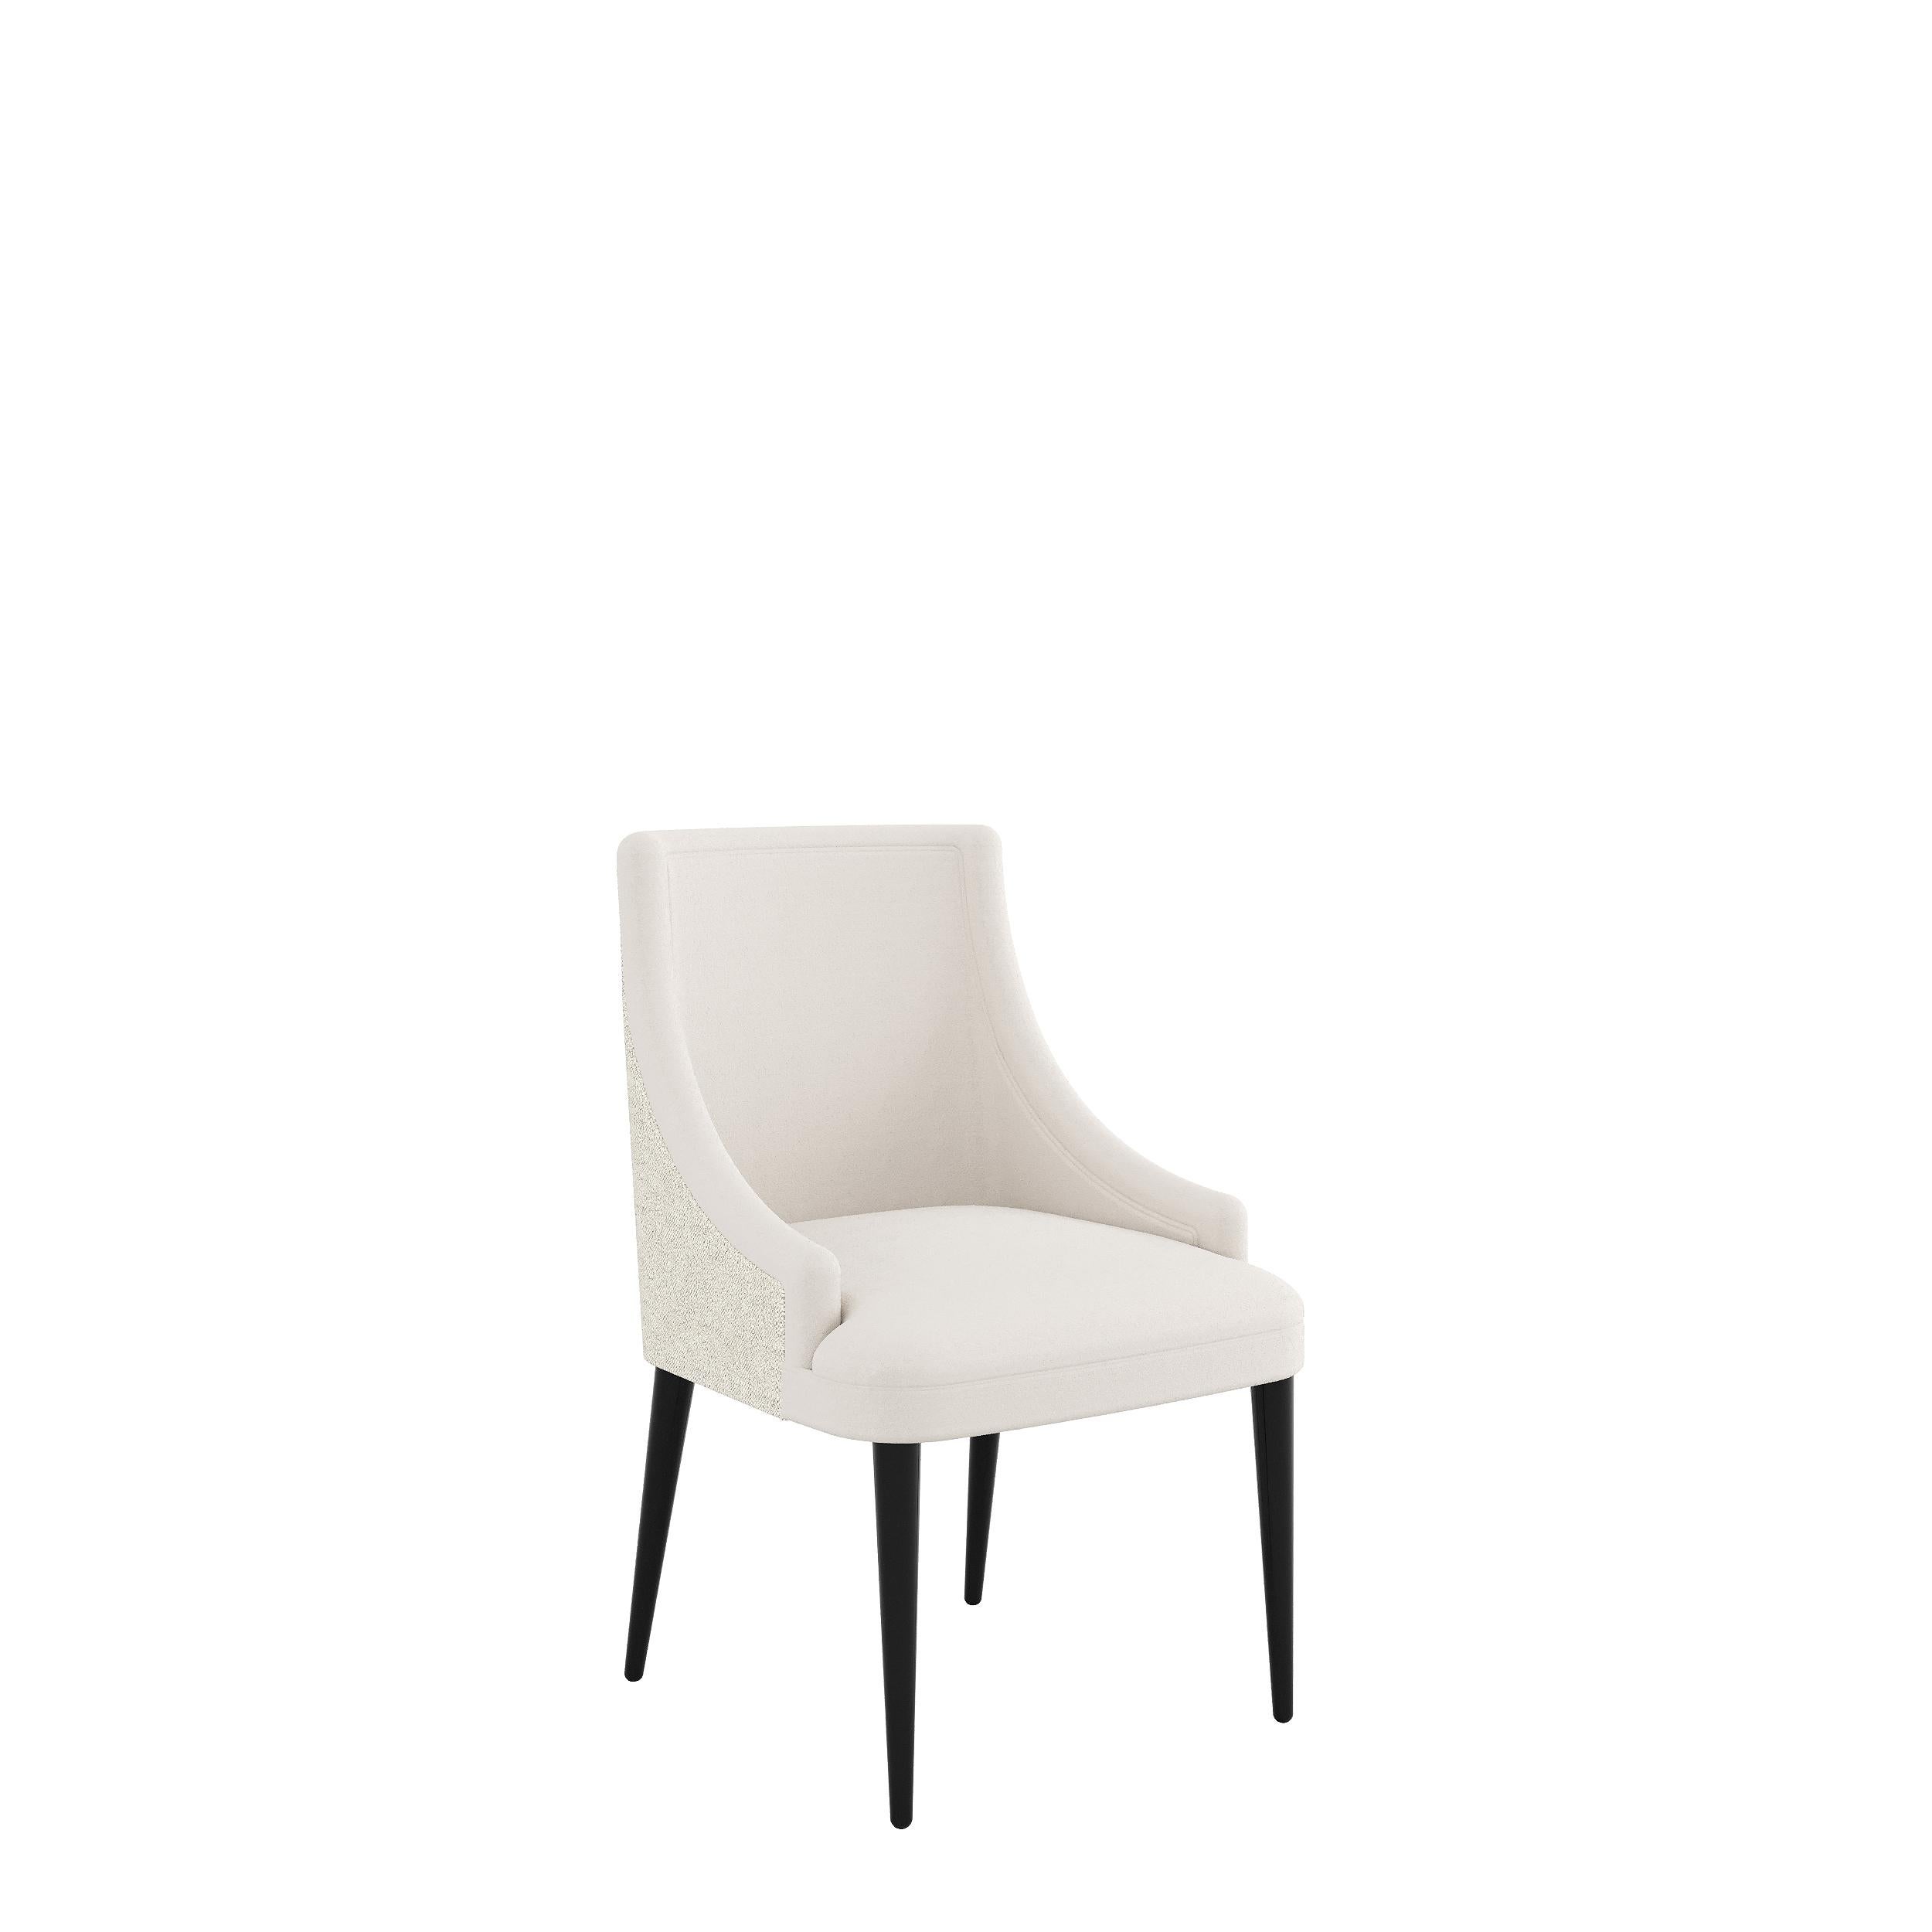 Lacquered CORDOBA S dining chair with solid wood legs For Sale